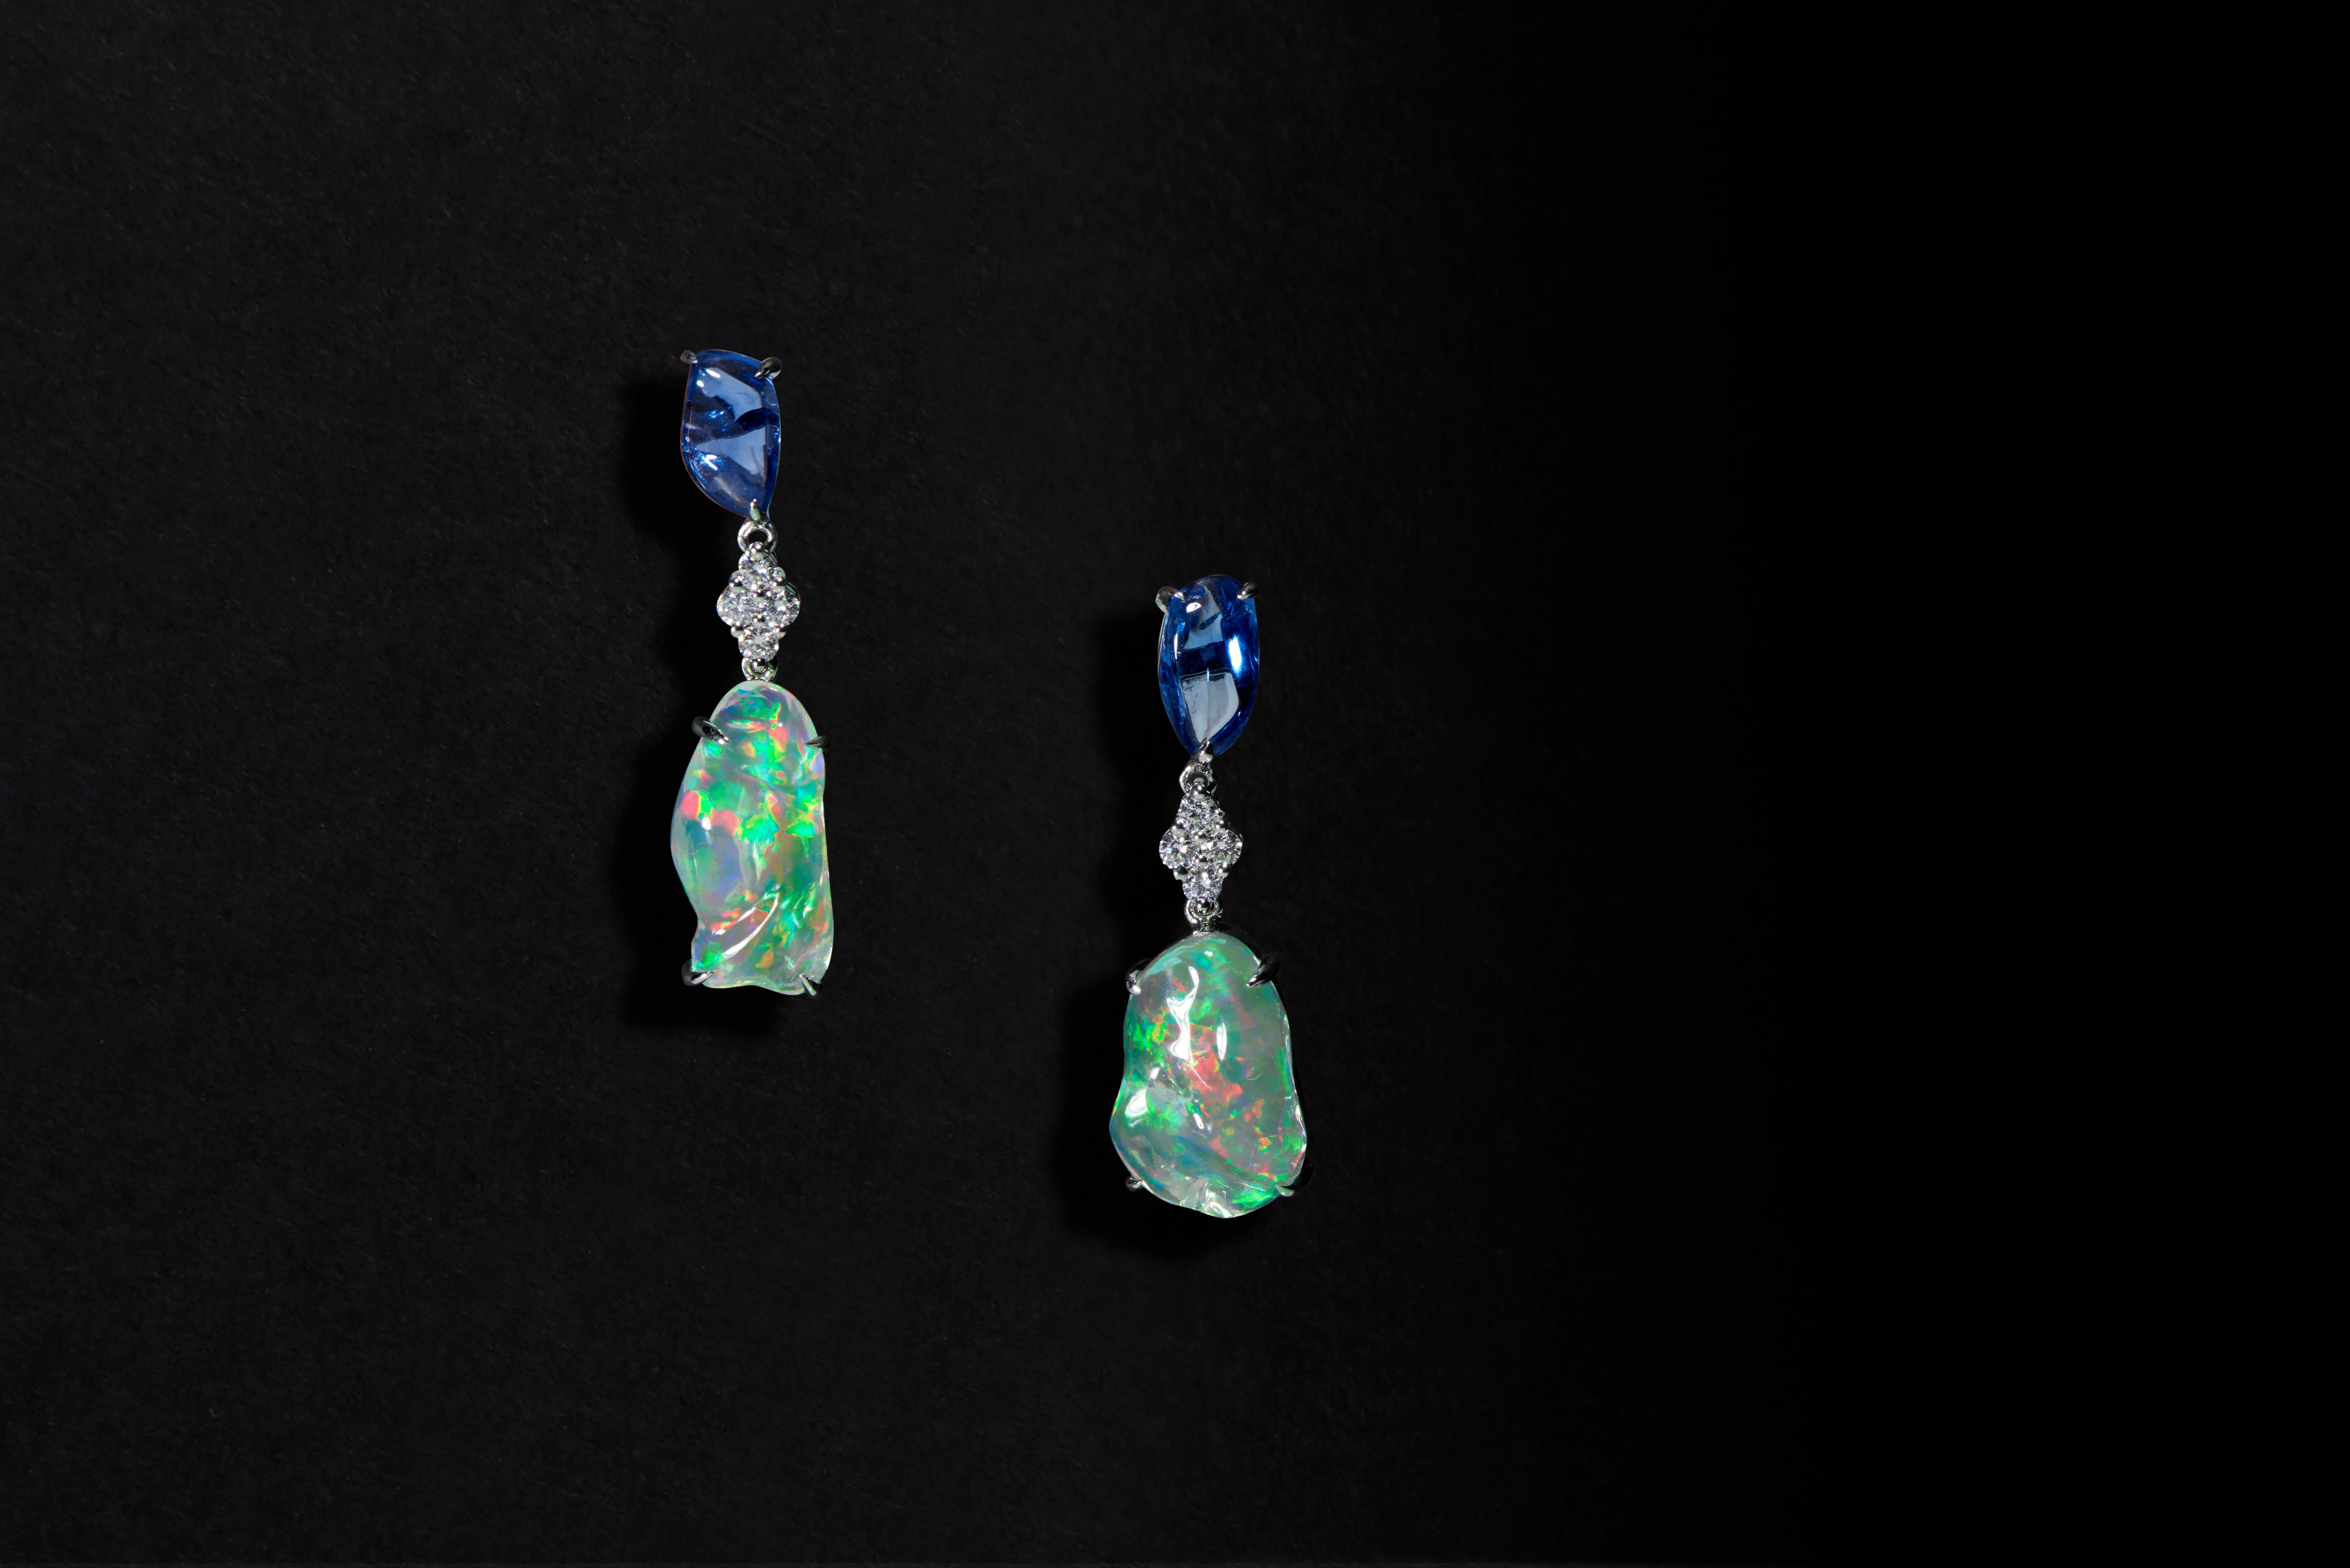 A dramatic combination of gemstones and a dazzling array of vivid hues create a unique and statement-making impression with Ri Noor’s Ice Drops Blue Sapphire Clear Fire Opal and Diamond Earrings. A saturated blue sapphire, in a bold organic natural